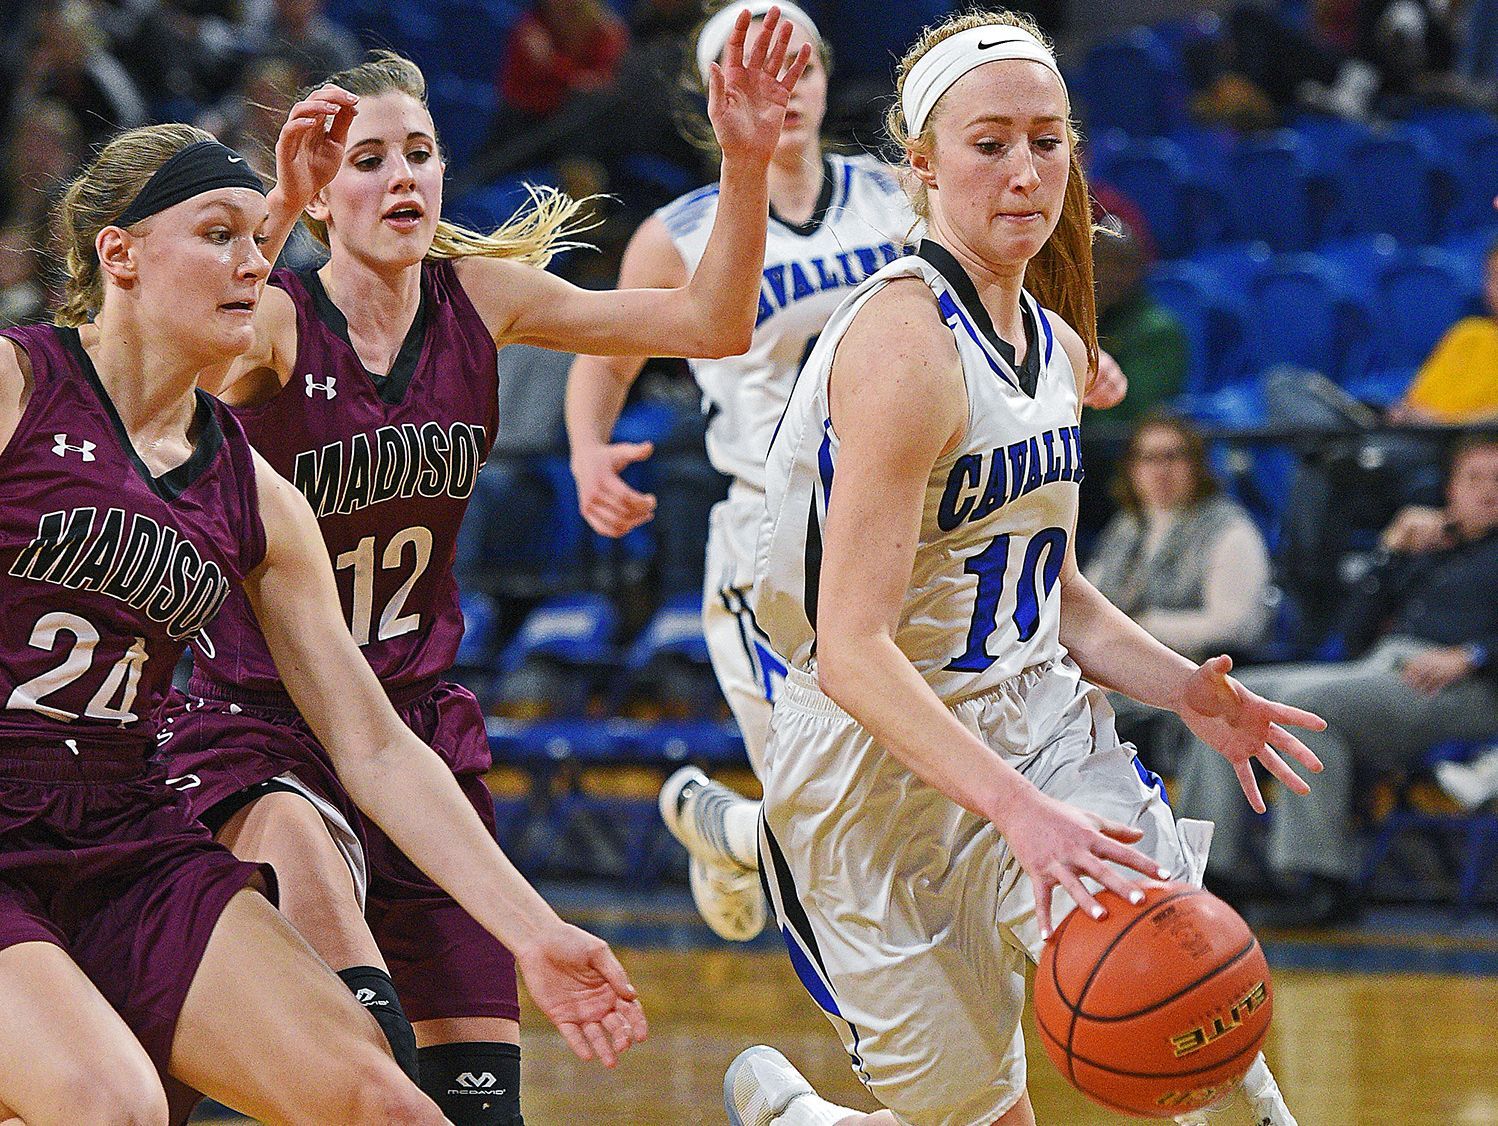 St. Thomas More's Dru Gylten (10) dribbles past Madison's Olivia Rud (24) and Jessi Giles (12) during a 2017 SDHSAA Class A State Girls Basketball Tournament quarterfinal game Thursday, March 9, 2017, at Frost Arena on the South Dakota State University campus in Brookings, S.D. St. Thomas More beat Madison 57-32.